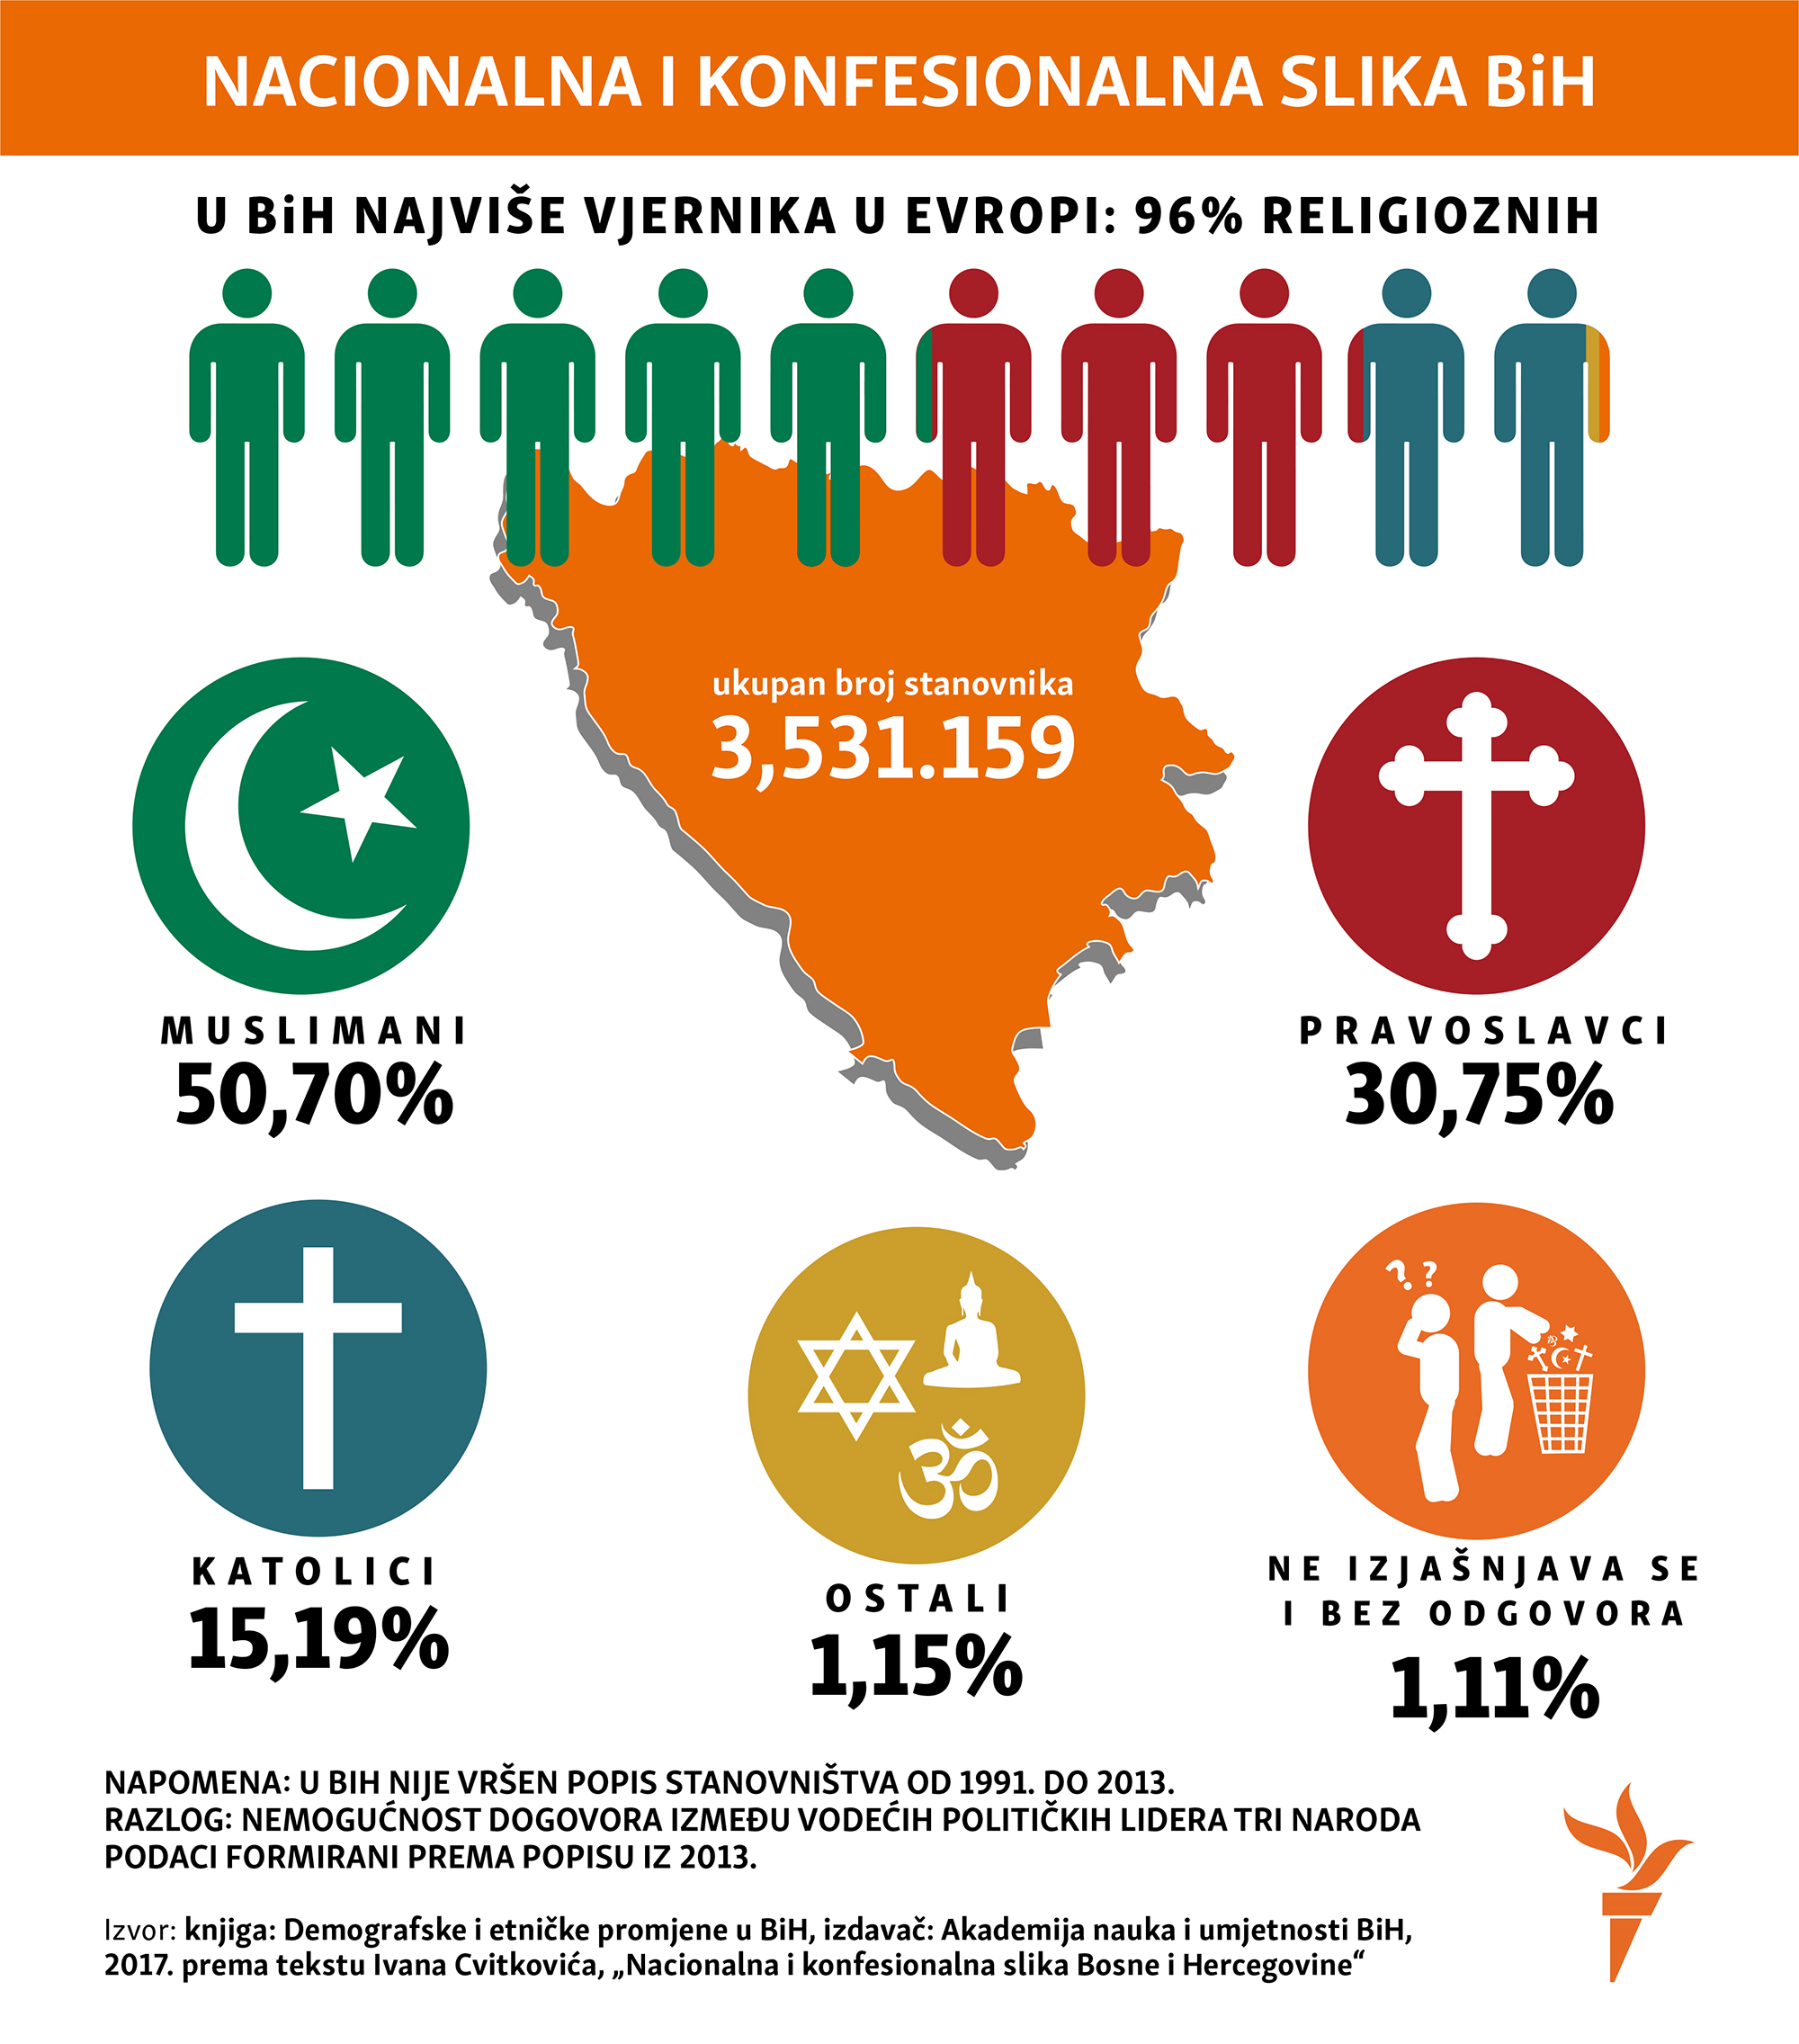 religion and ethnicity in Bosnia